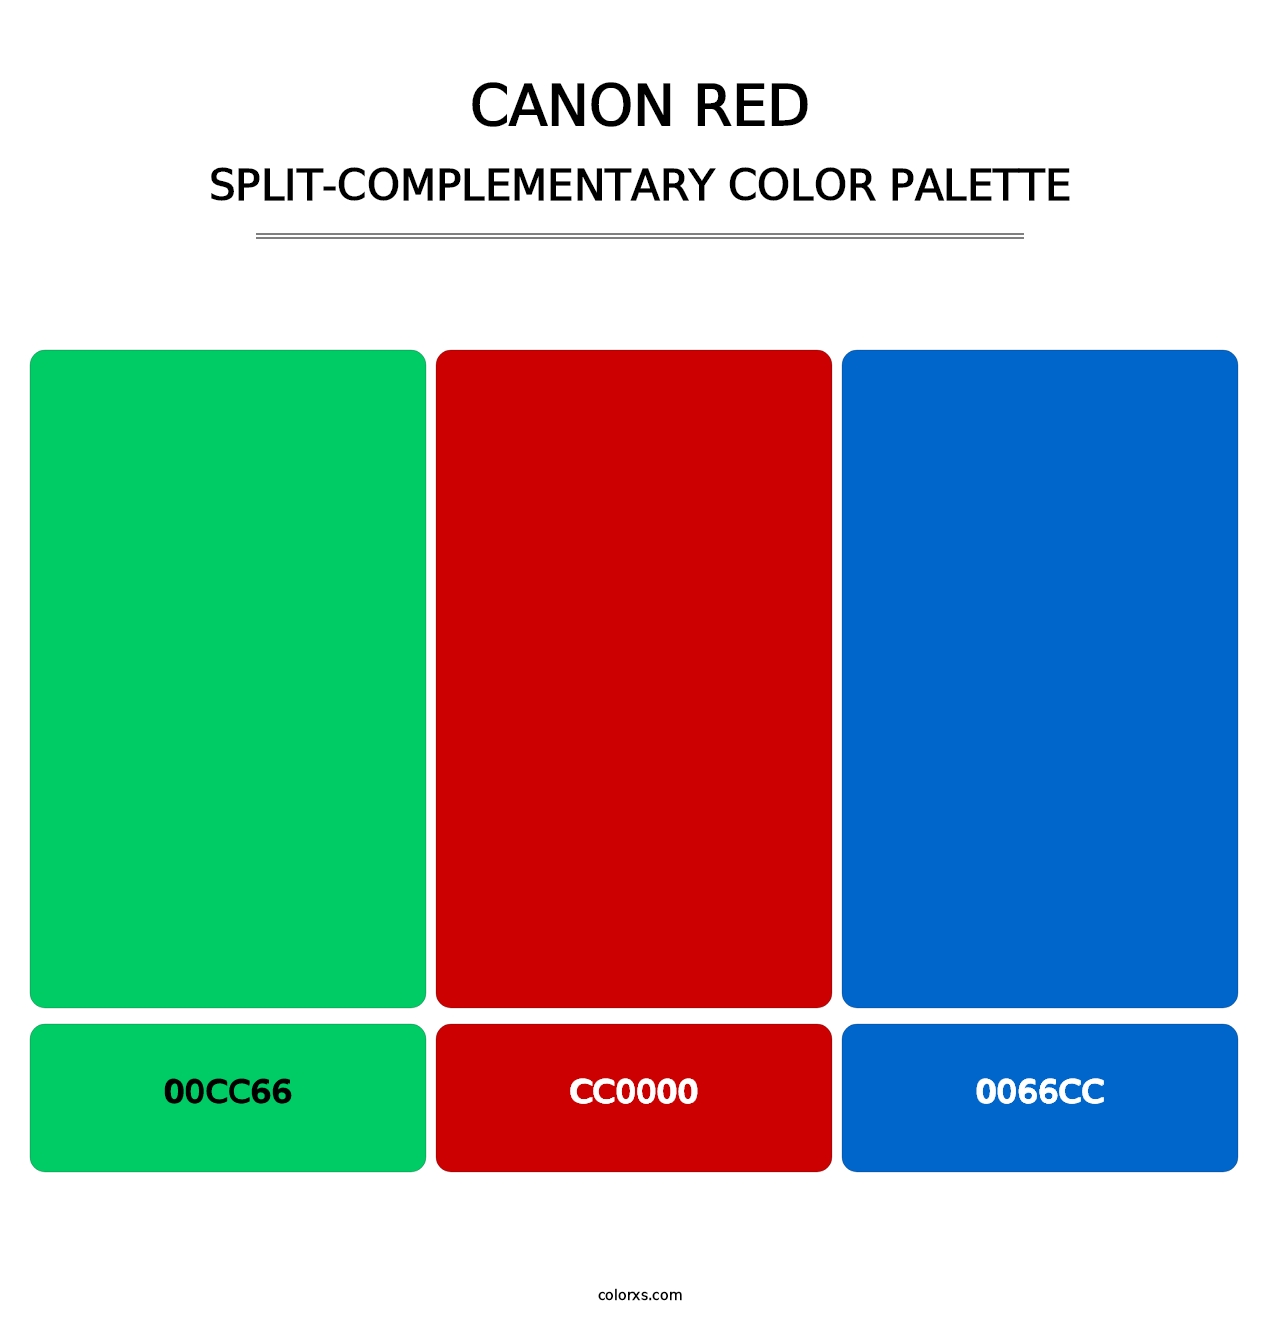 Canon Red - Split-Complementary Color Palette